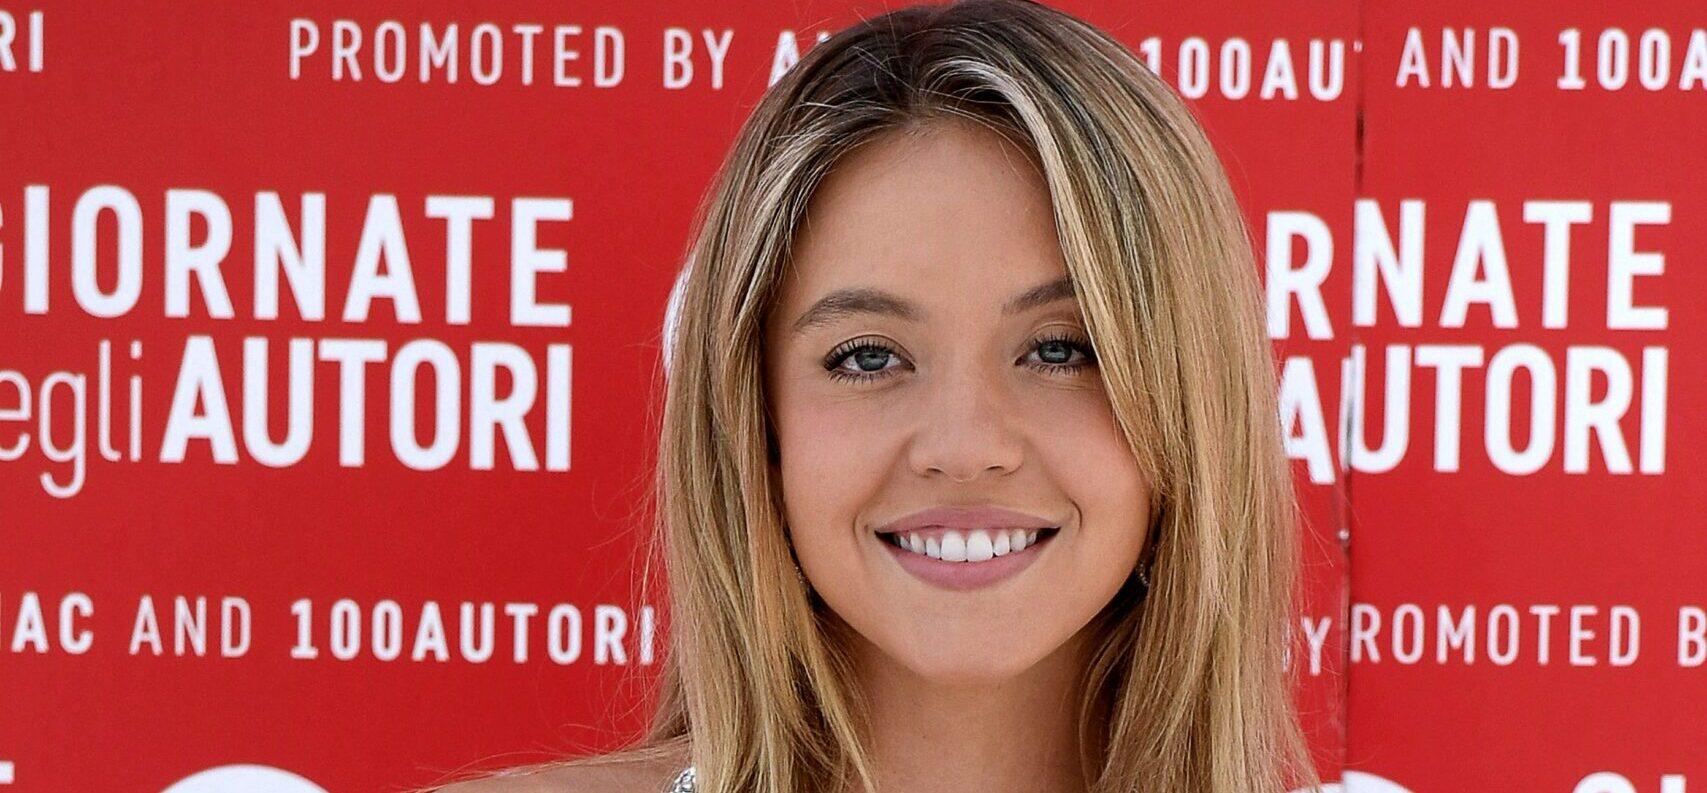 Sydney Sweeney Brings Holiday Cheer In Brand-New Photos